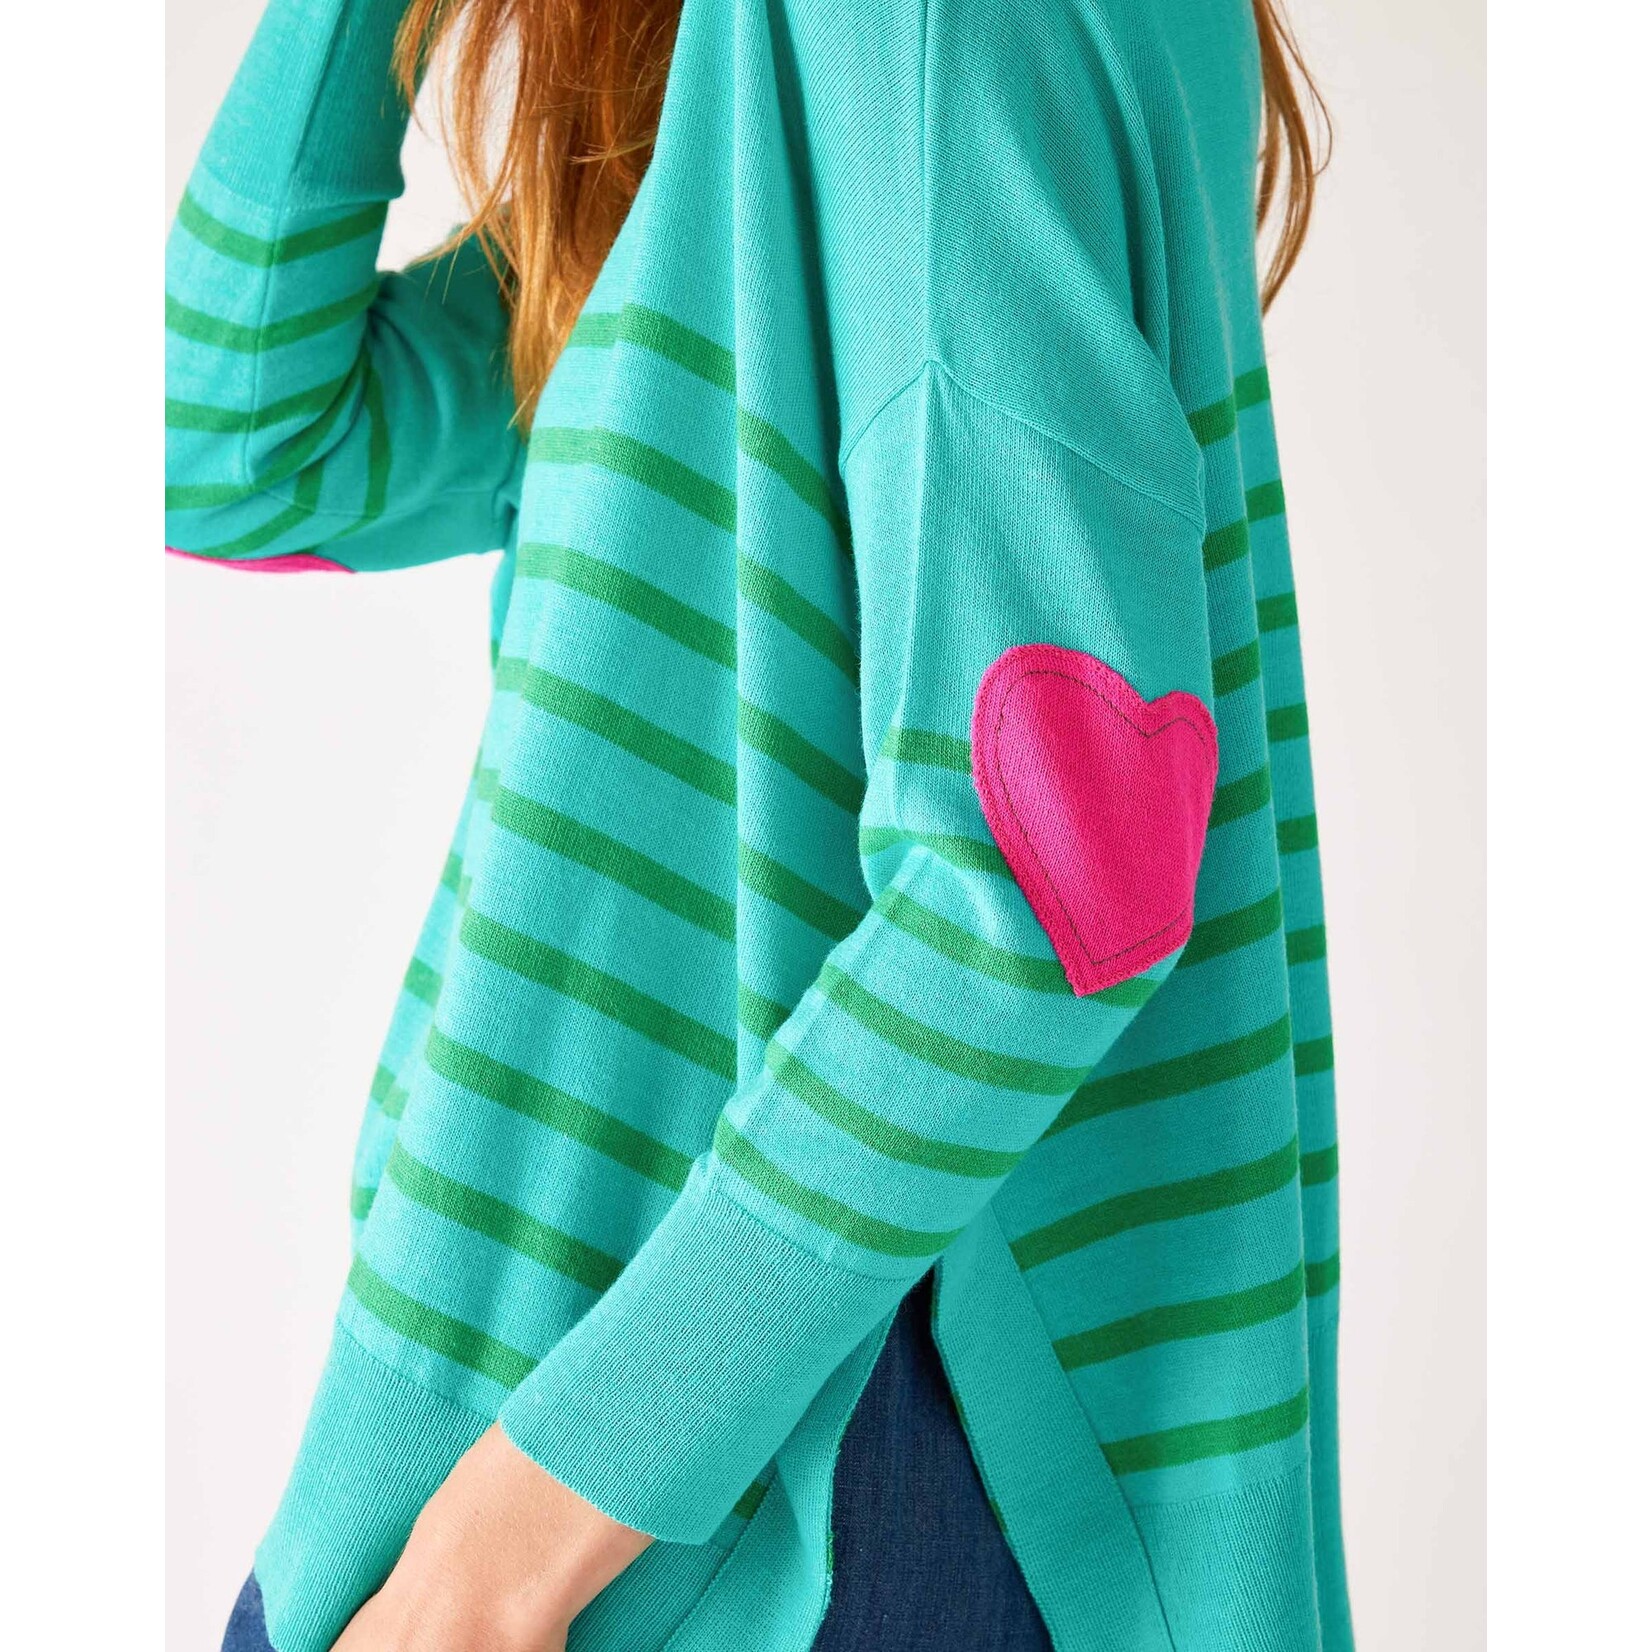 Mer-Sea Mer-Sea Amour Sweater with Heart Patch -  Turquoise/Jade Stripe